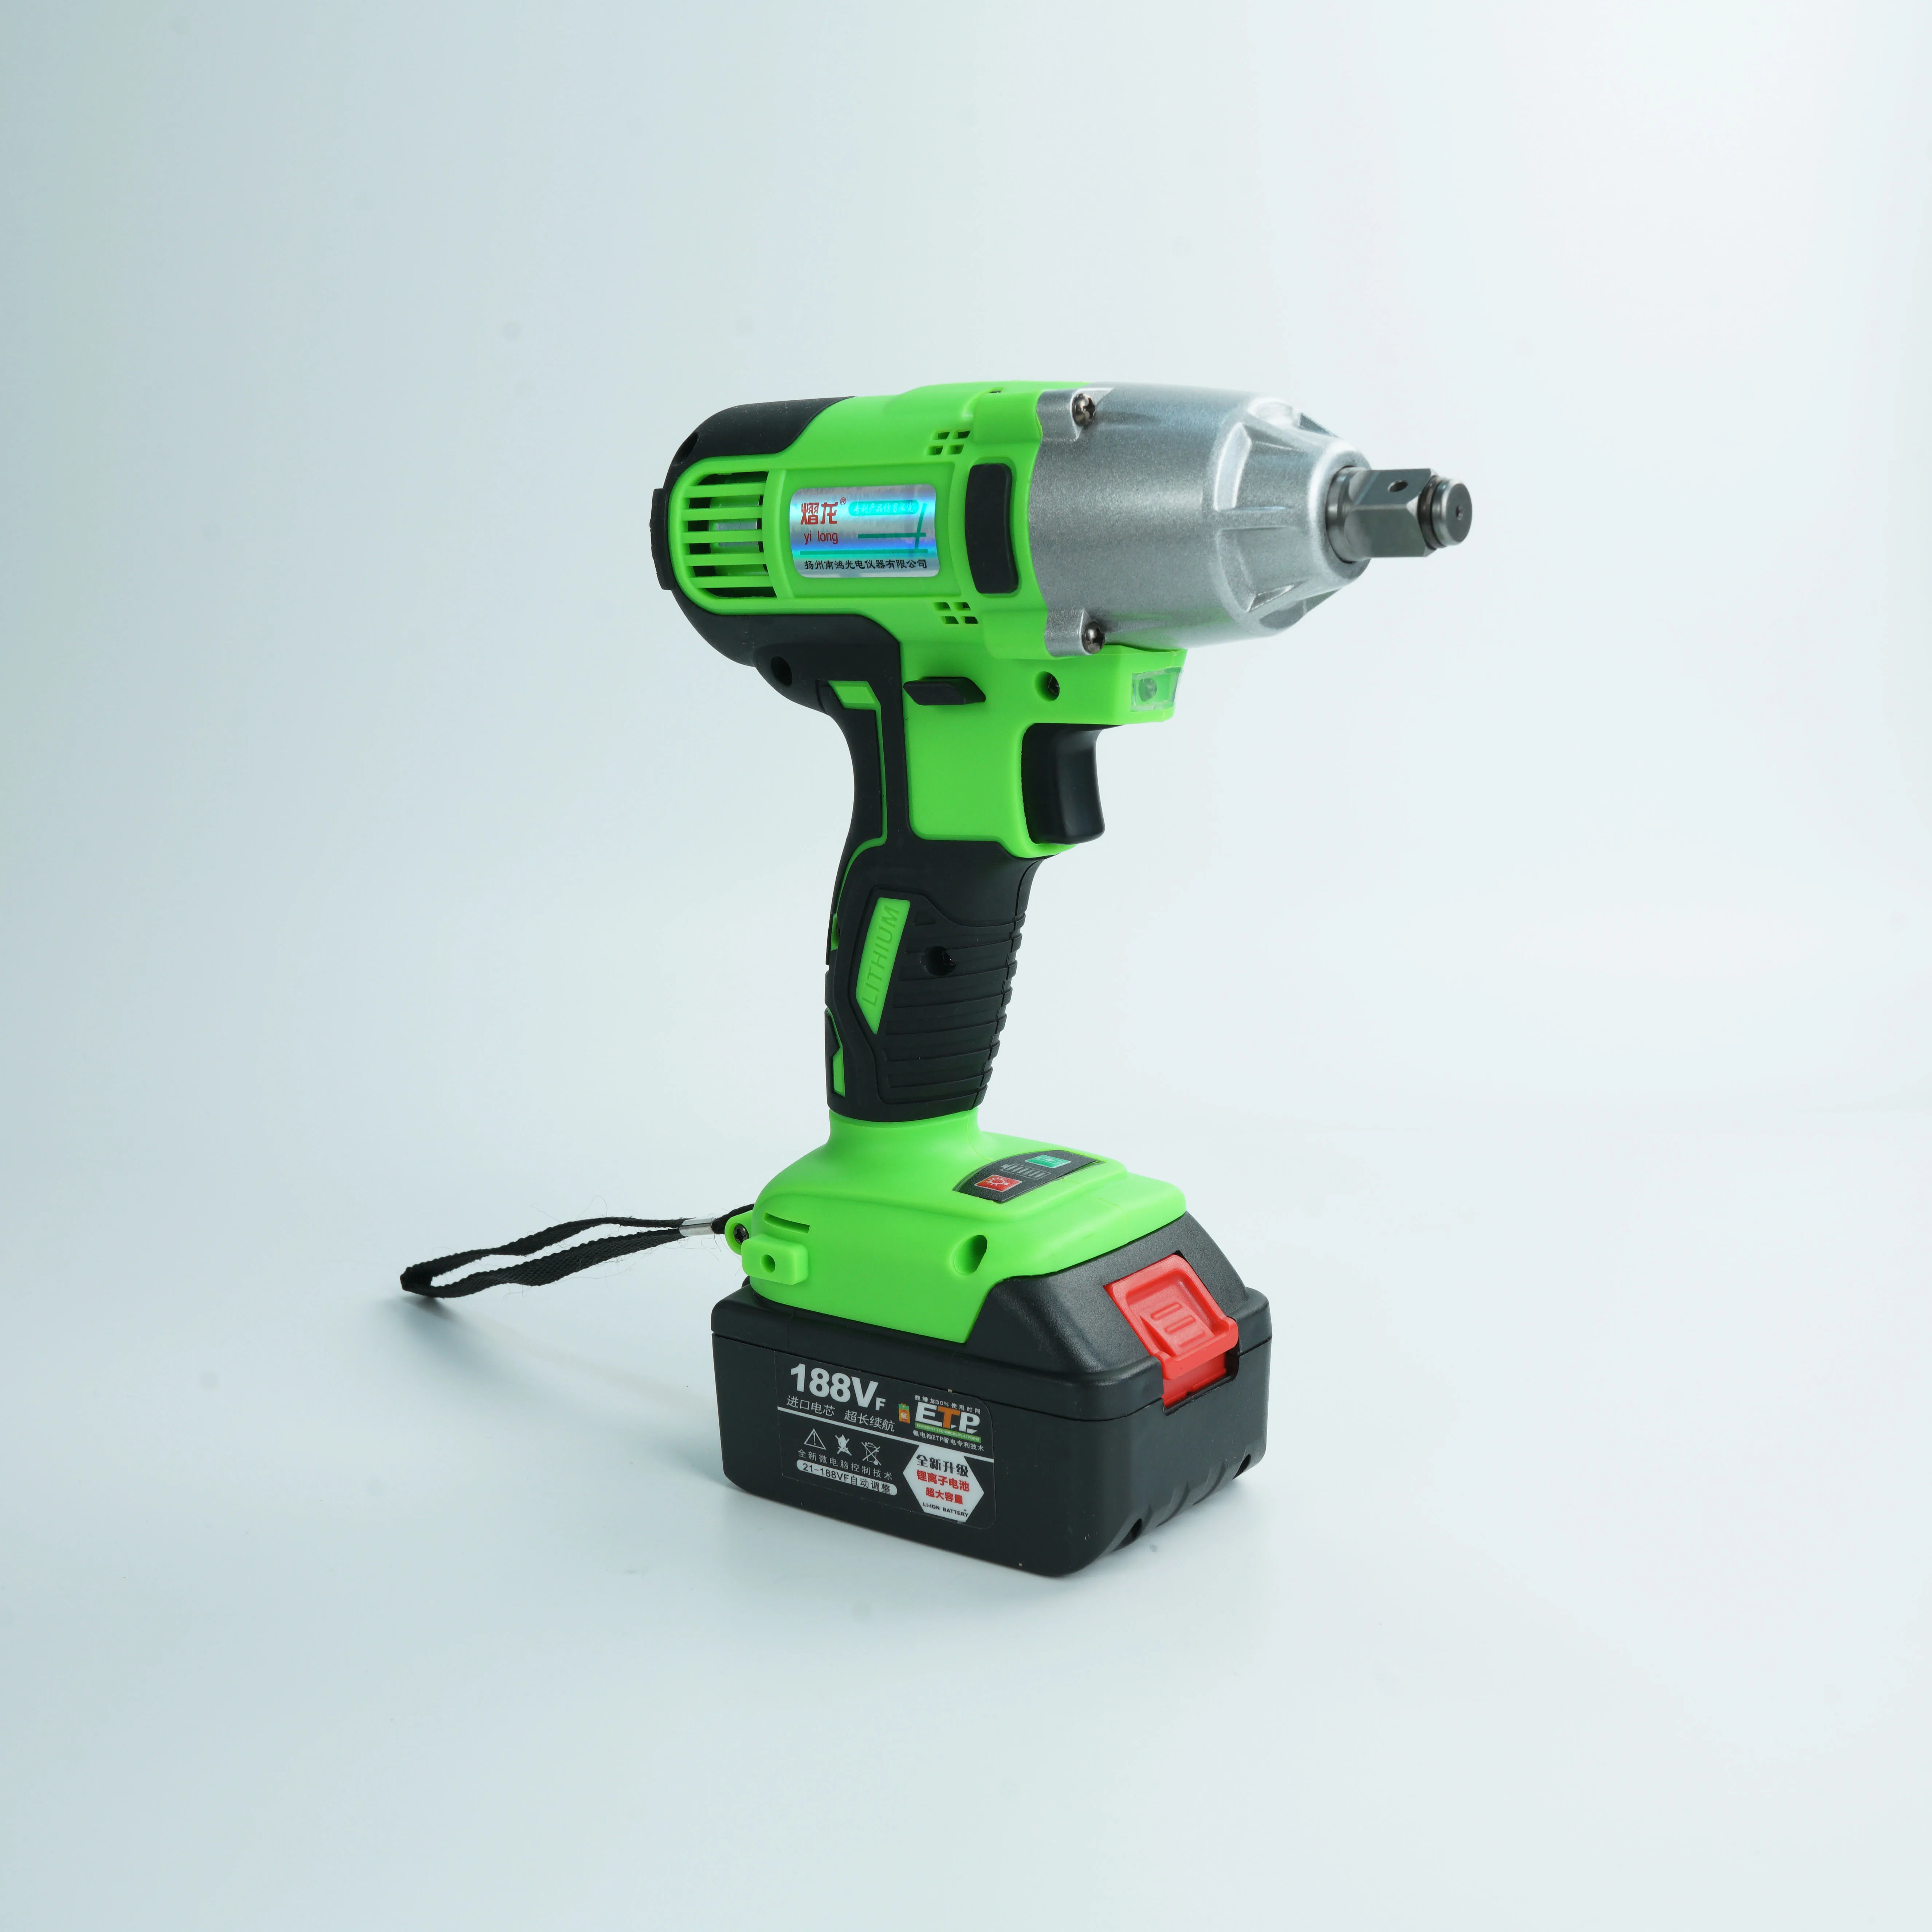 Nahom OEM Brushless Impact Wrench Cordless For Construction